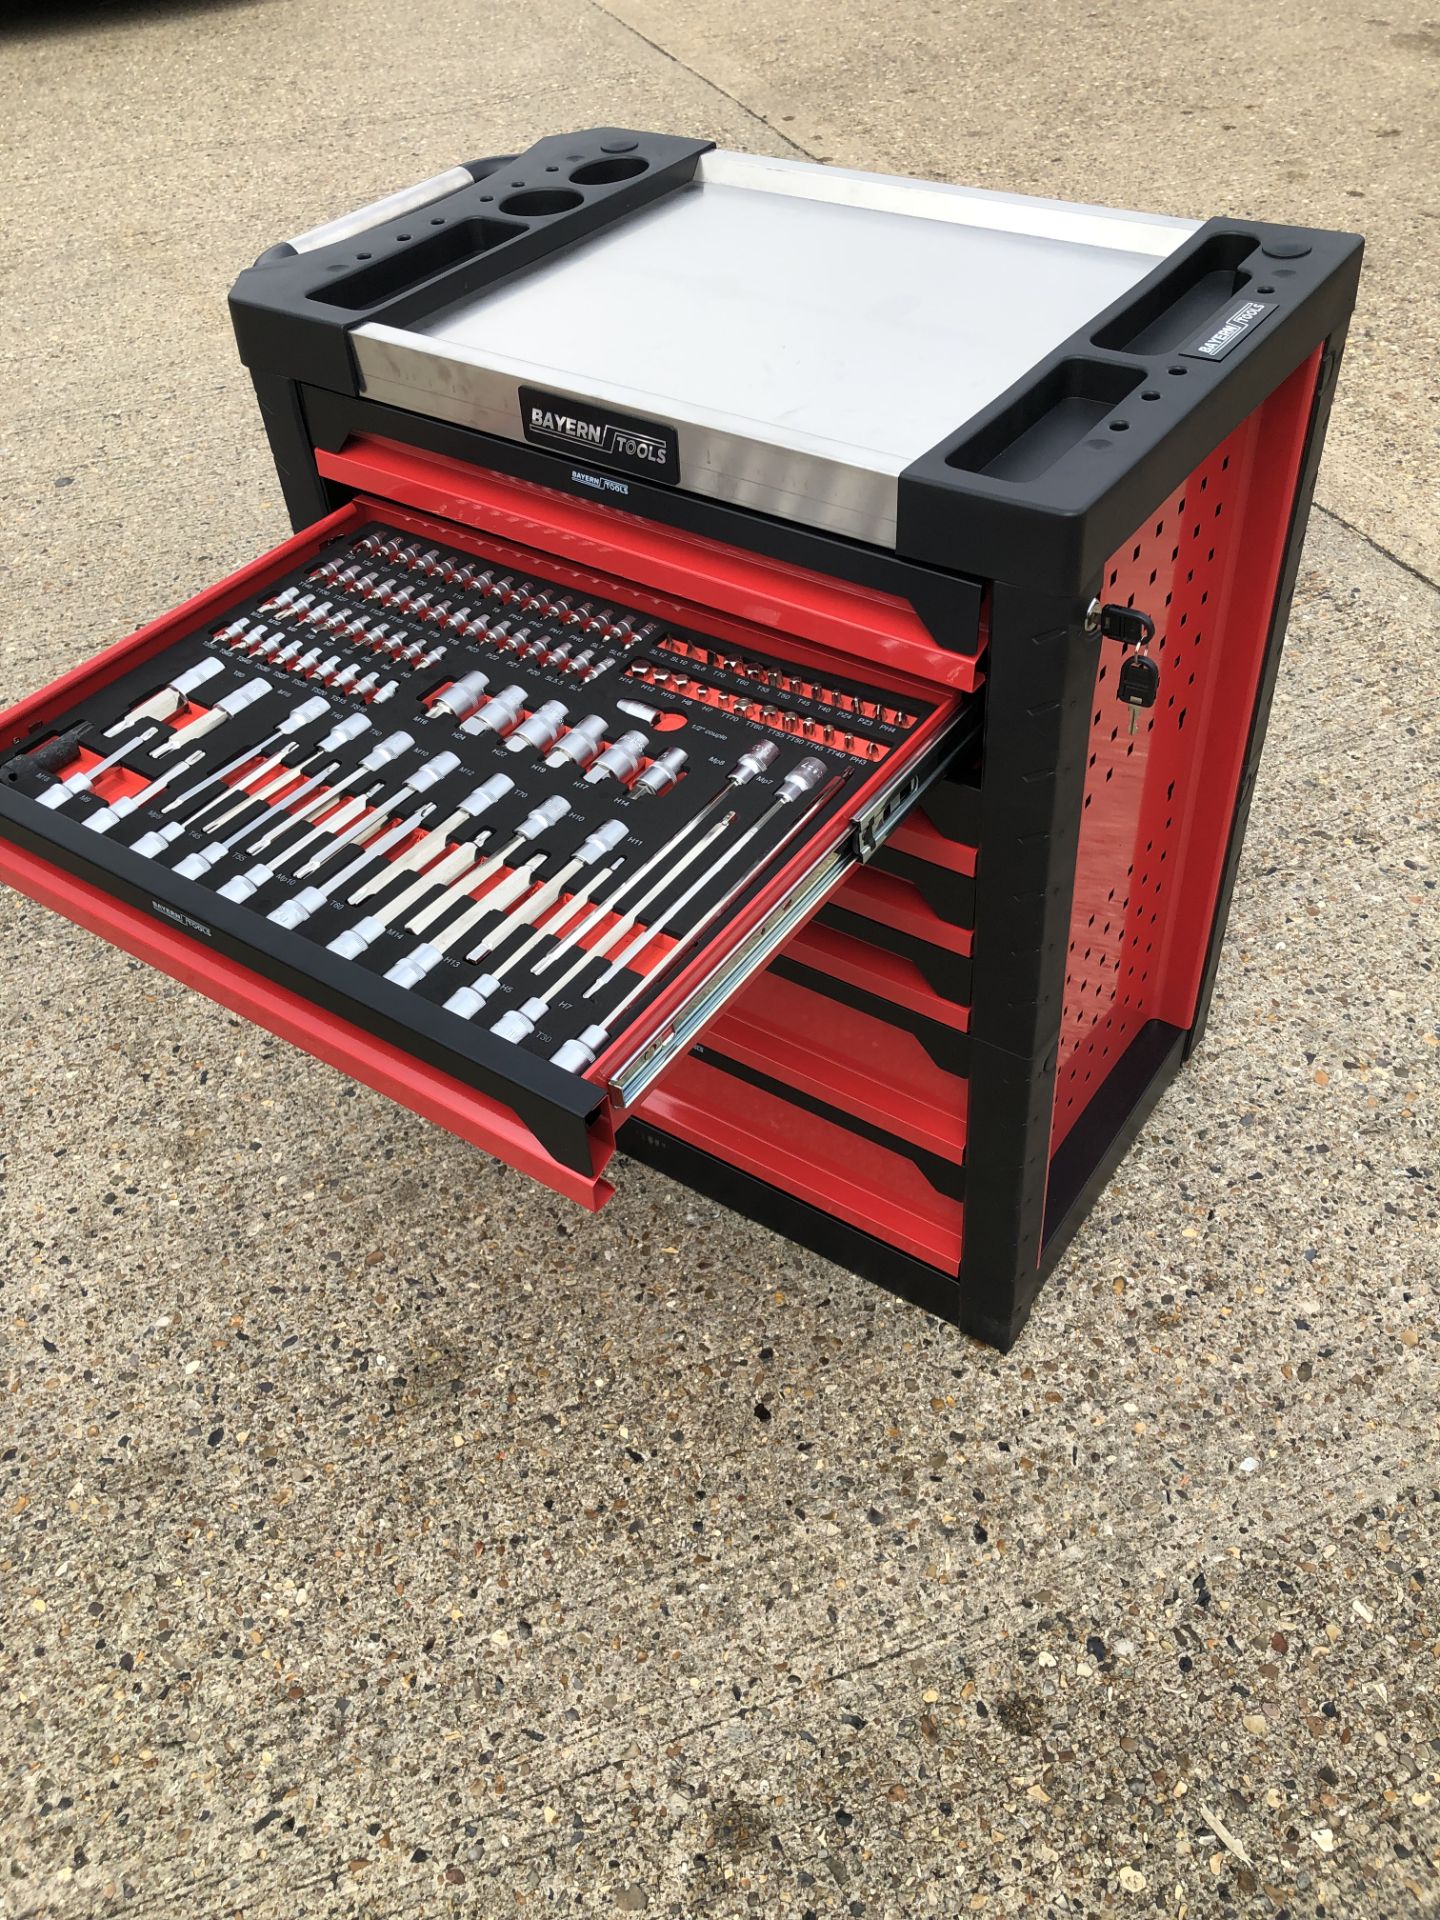 V Brand New Professional Locking Garage Tool Trolley/Cabinet (Red/Blue) with Metal Top and 7 Drawers - Image 2 of 9